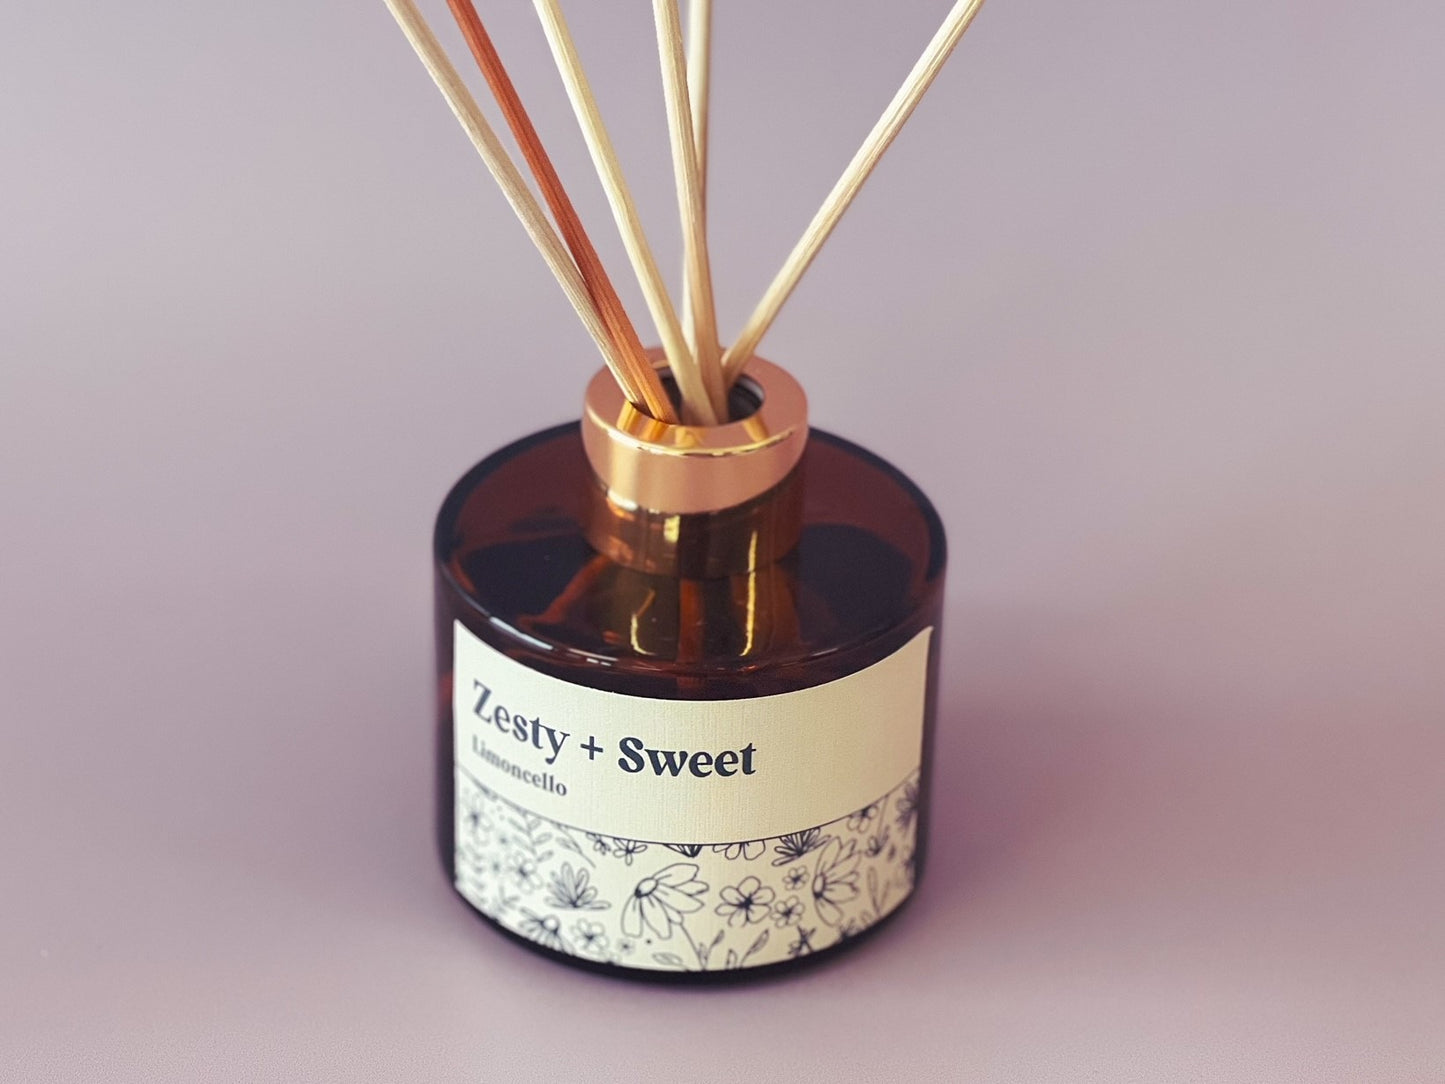 Amber Diffuser | Zesty + Sweet (Limoncello)